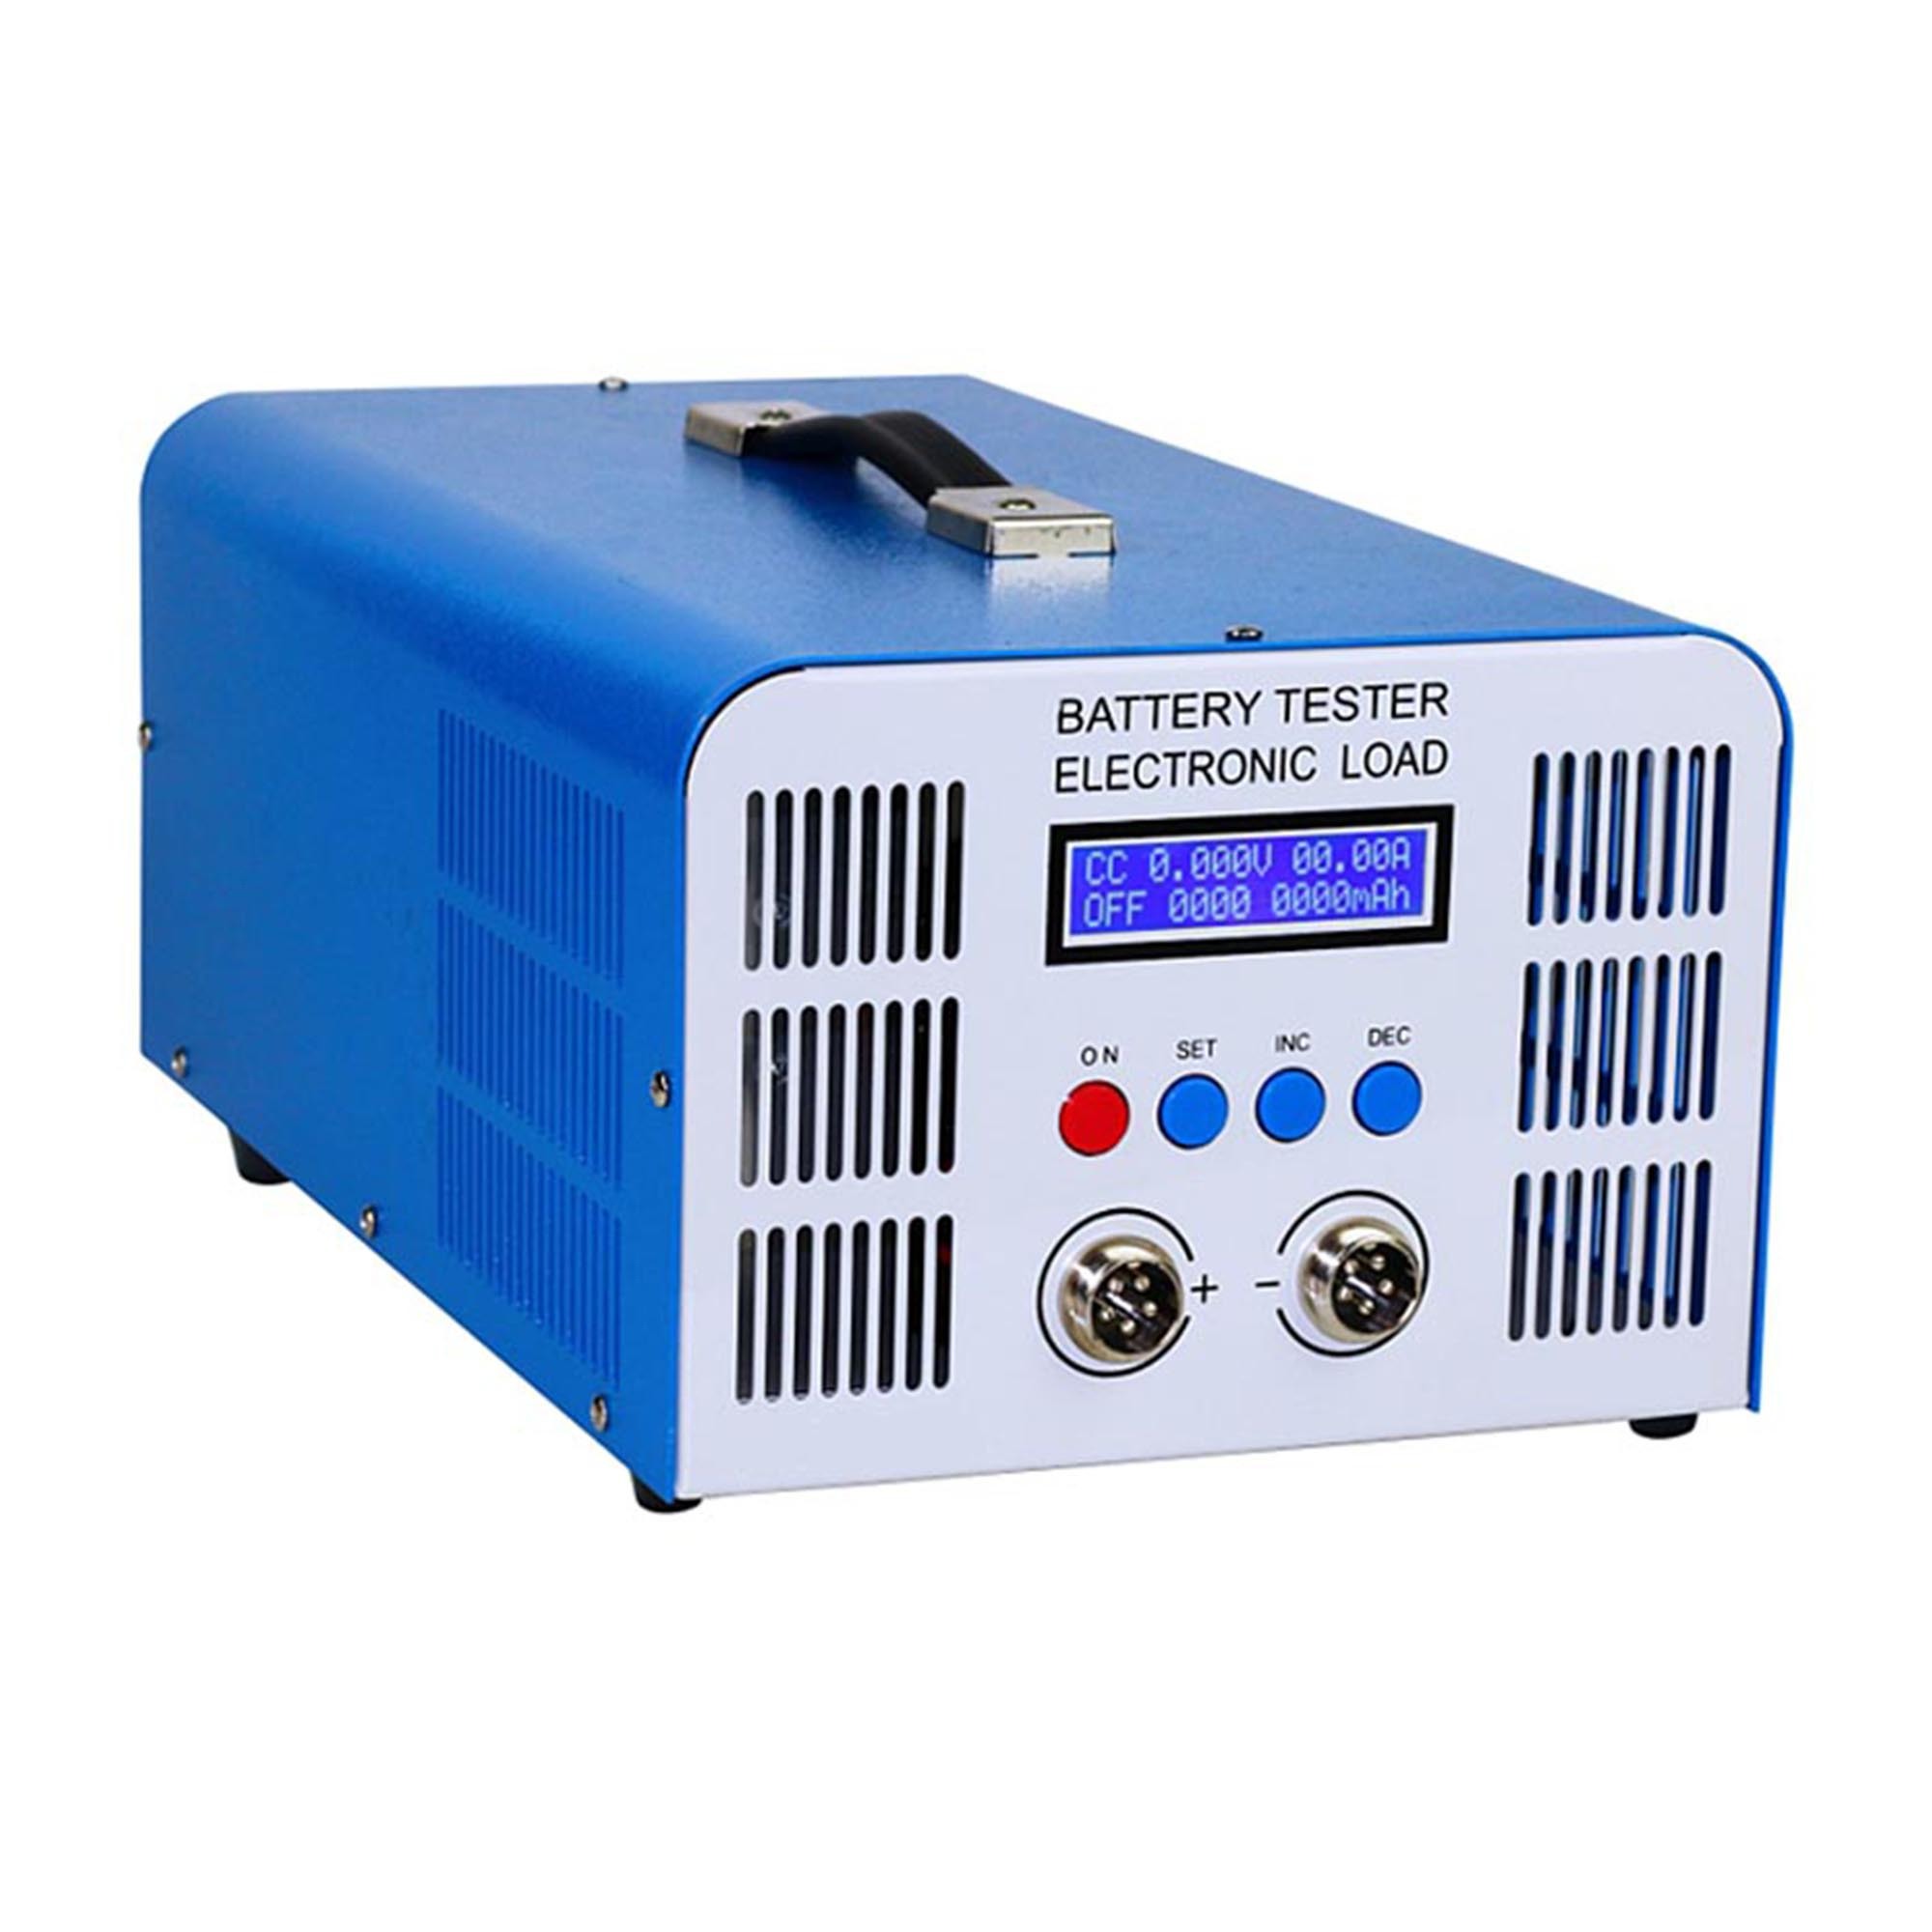 EBC-A40L High Accuracy Battery Charger Discharger 5V 40A Lifepo4 Battery Cells Capacity Checker Tester Cycle time Capacity Voltage,Testing Tool